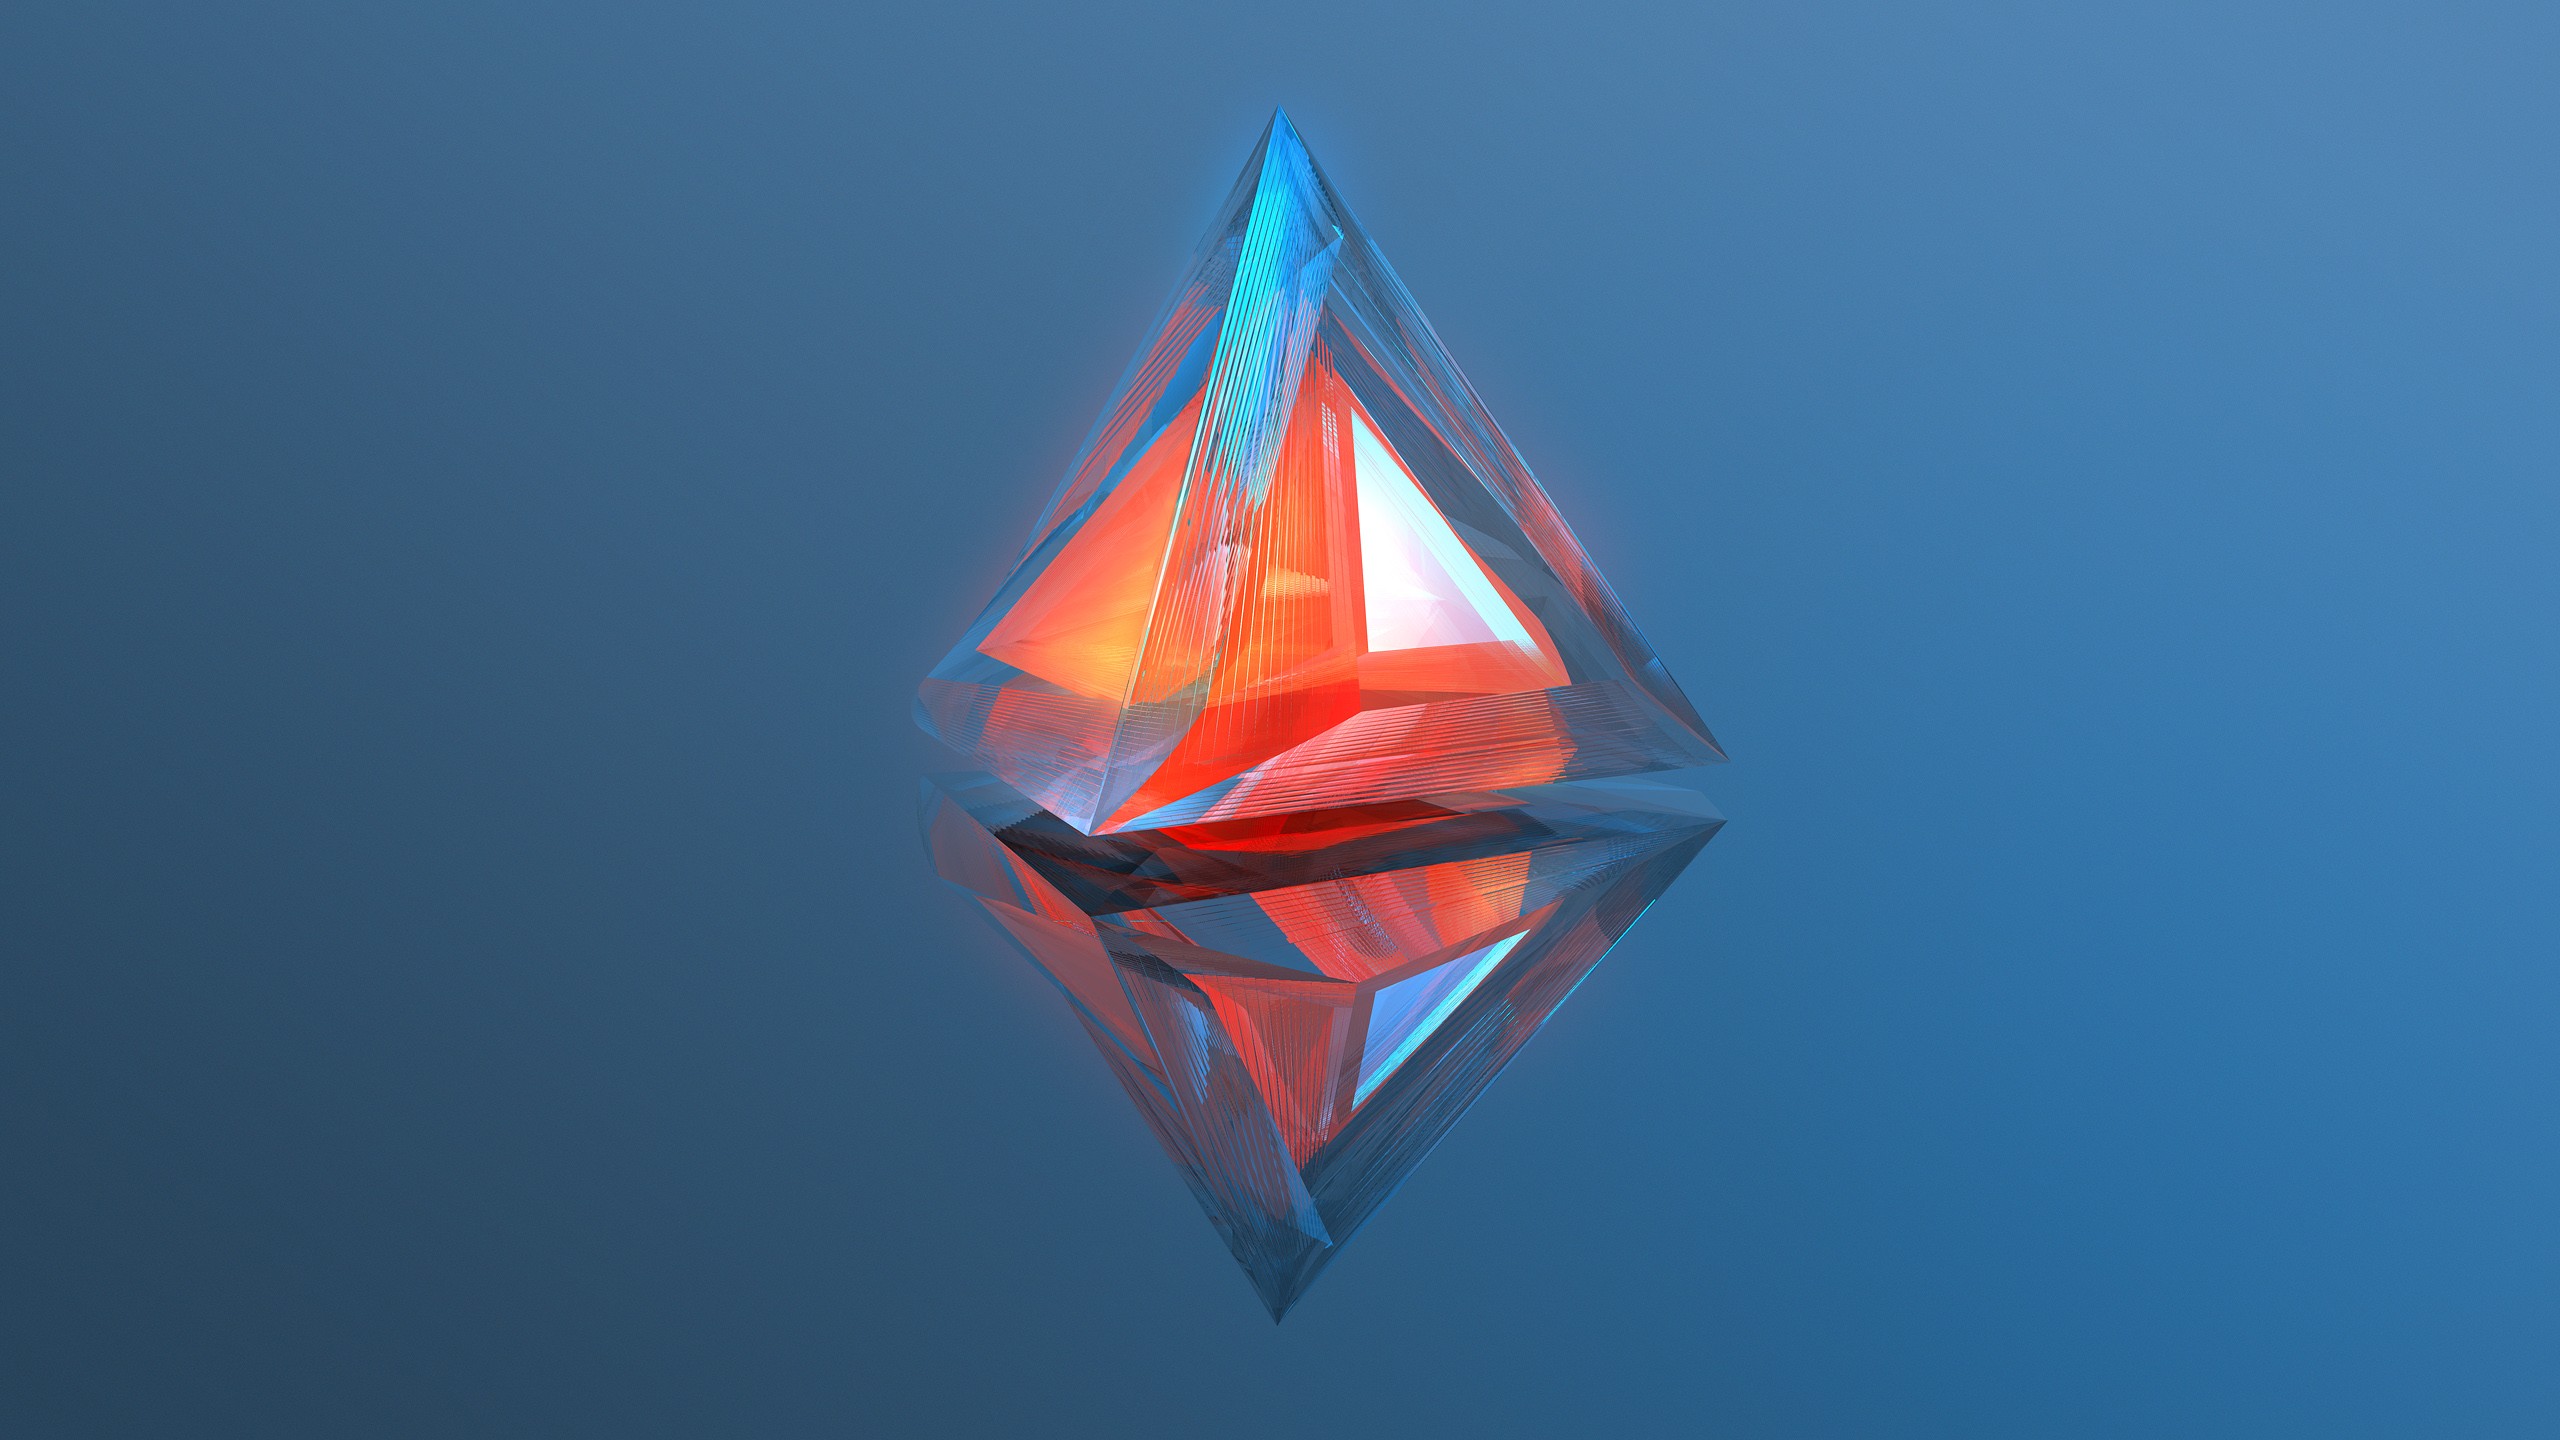 General 2560x1440 digital art abstract minimalism geometry blue background CGI triangle reflection warm colors MKBHD blue red